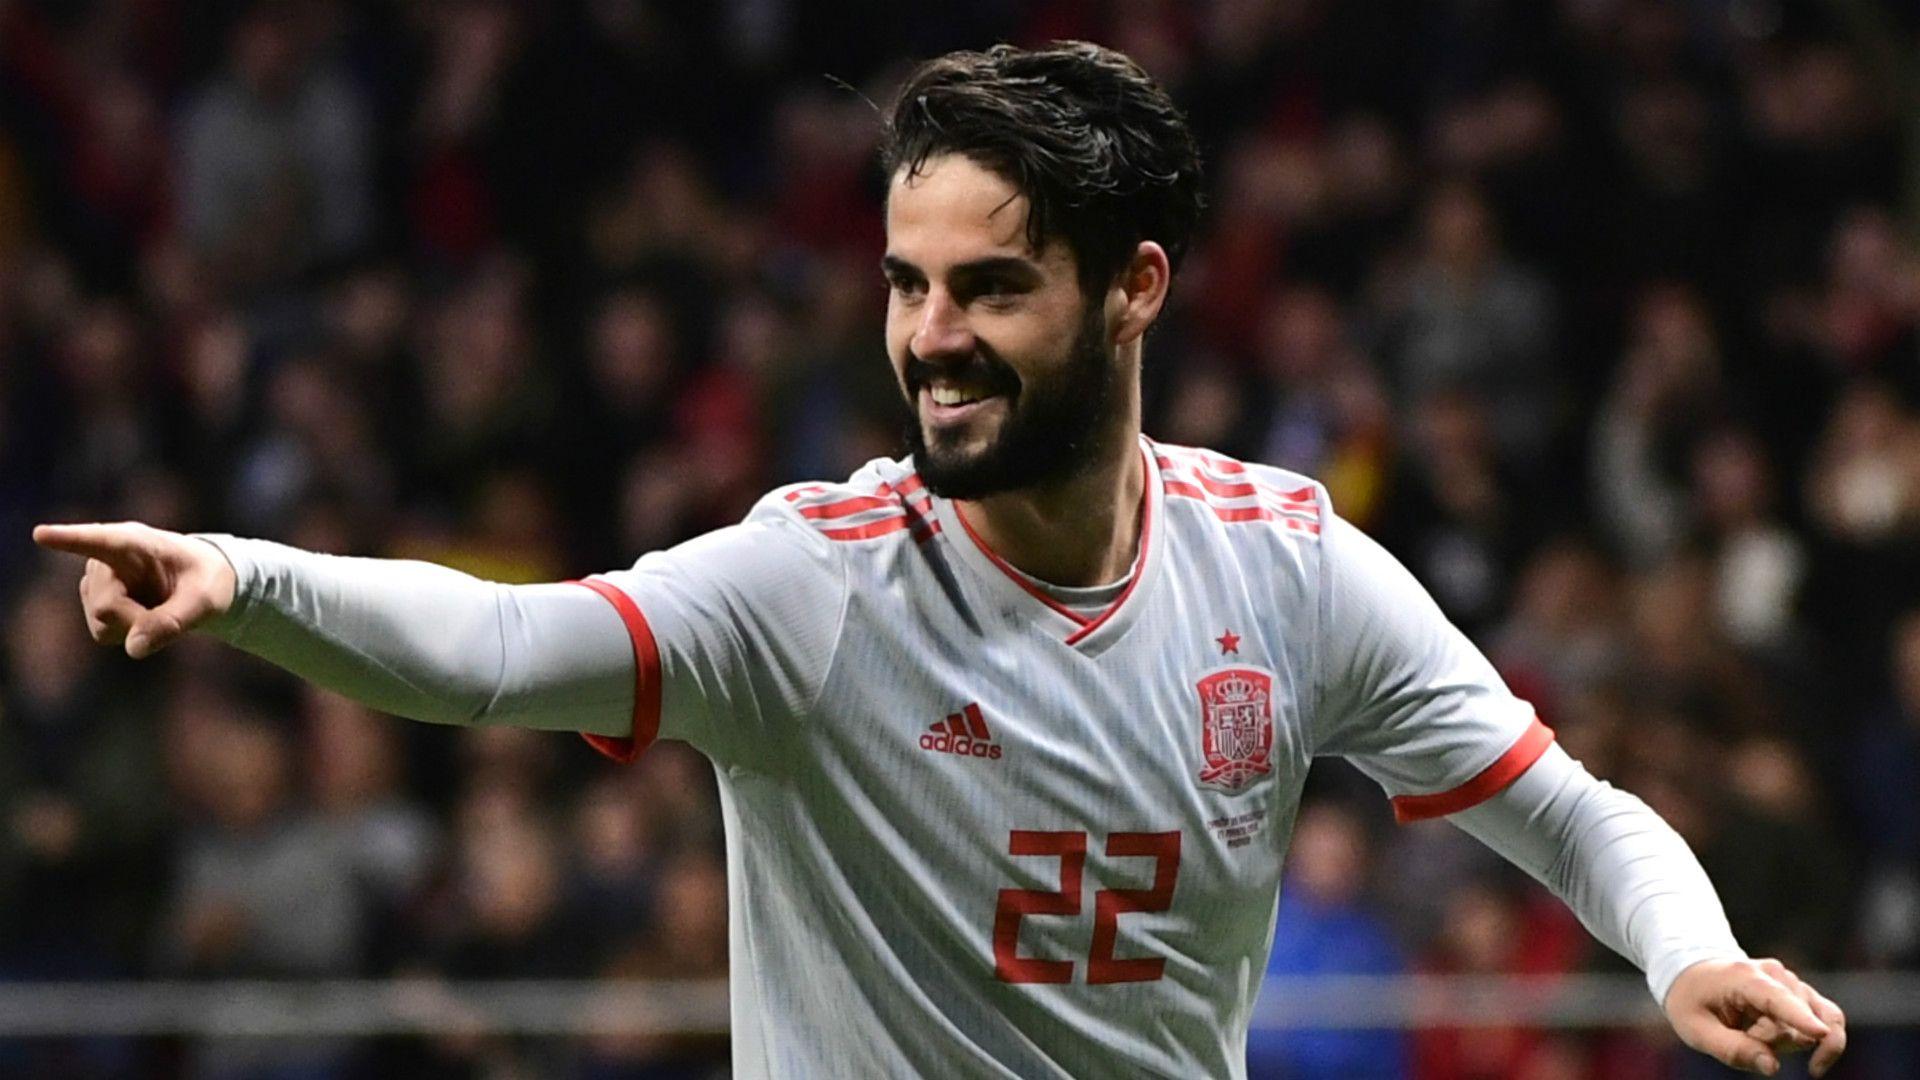 Spain's 2018 World Cup Squad: Who Joins Ramos & Iniesta In 23 Man